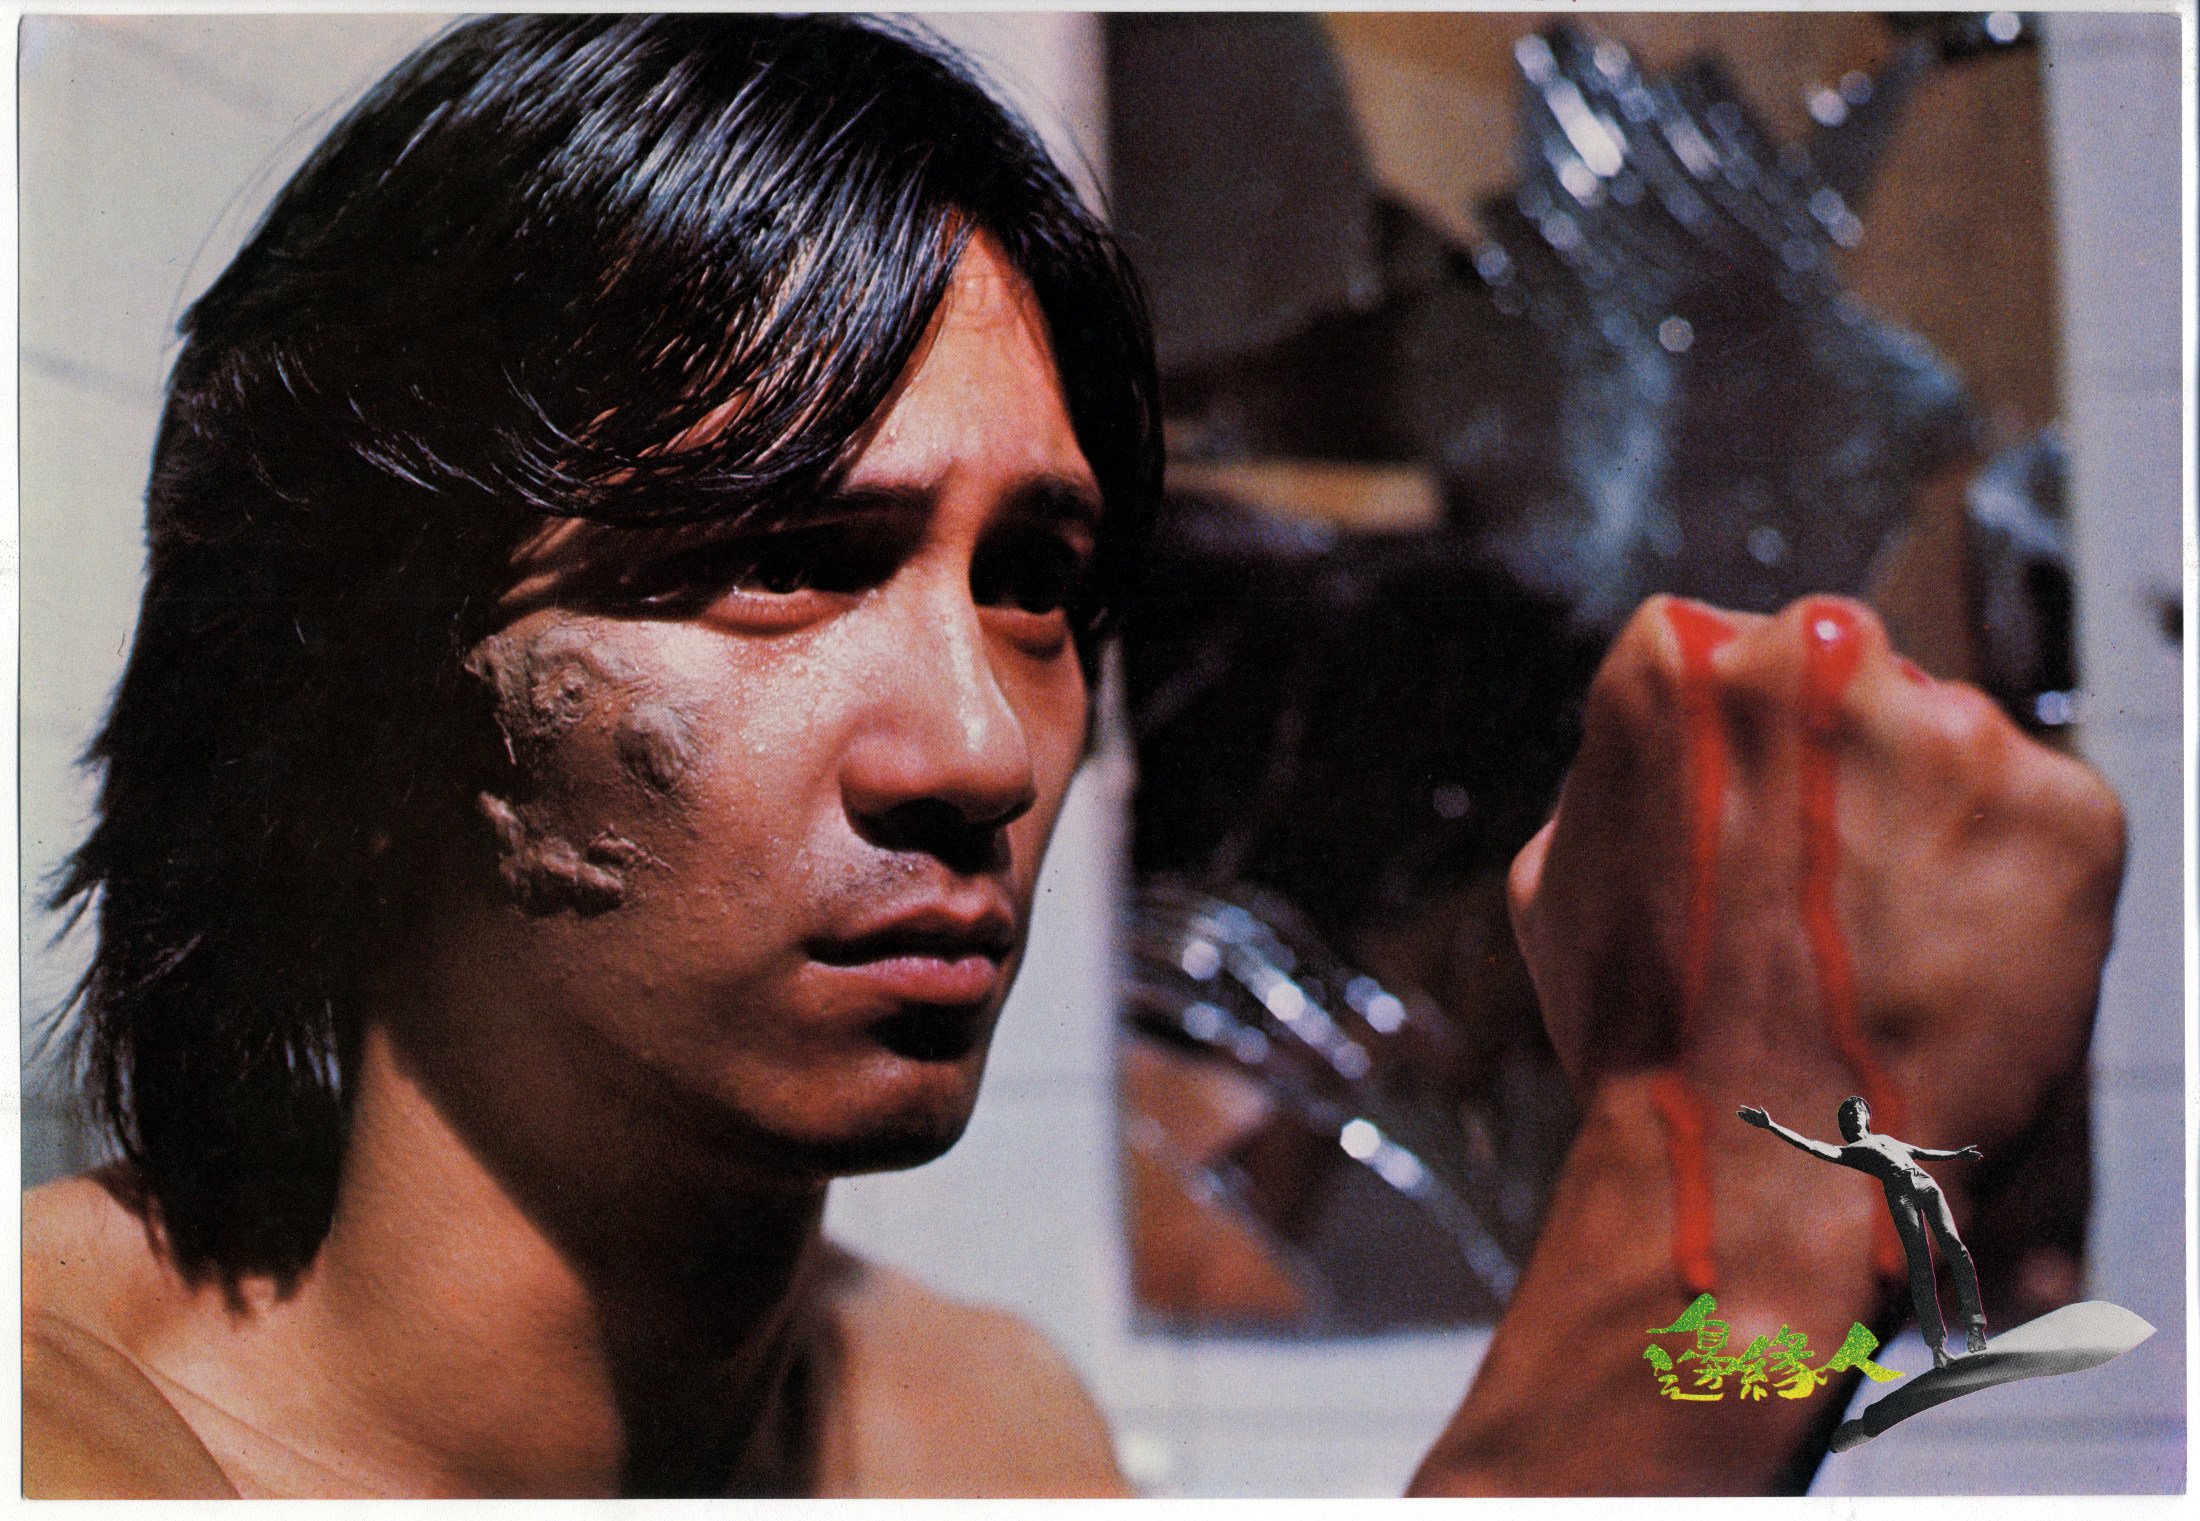 Eddie Chen in a still from Man on the Brink, the Hong Kong undercover police drama that set the stage for films like Infernal Affairs and City on Fire.